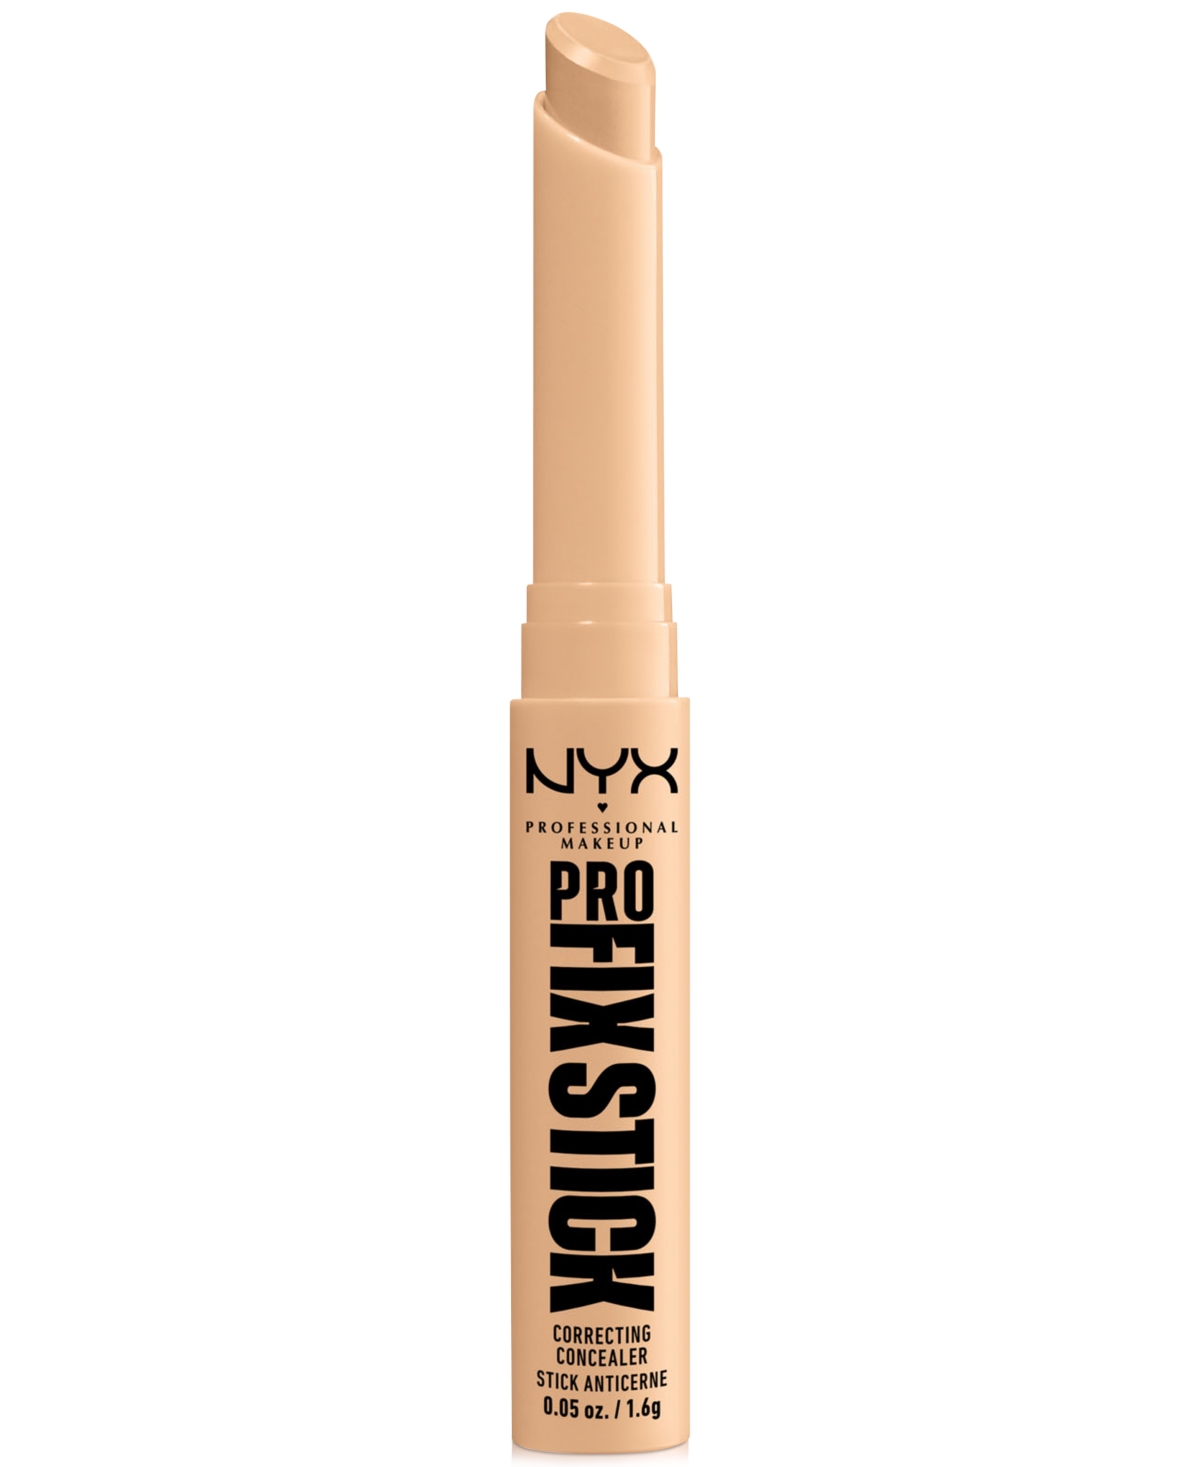 Nyx Professional Makeup Pro Fix Stick Correcting Concealer, 0.05 Oz. In Natural